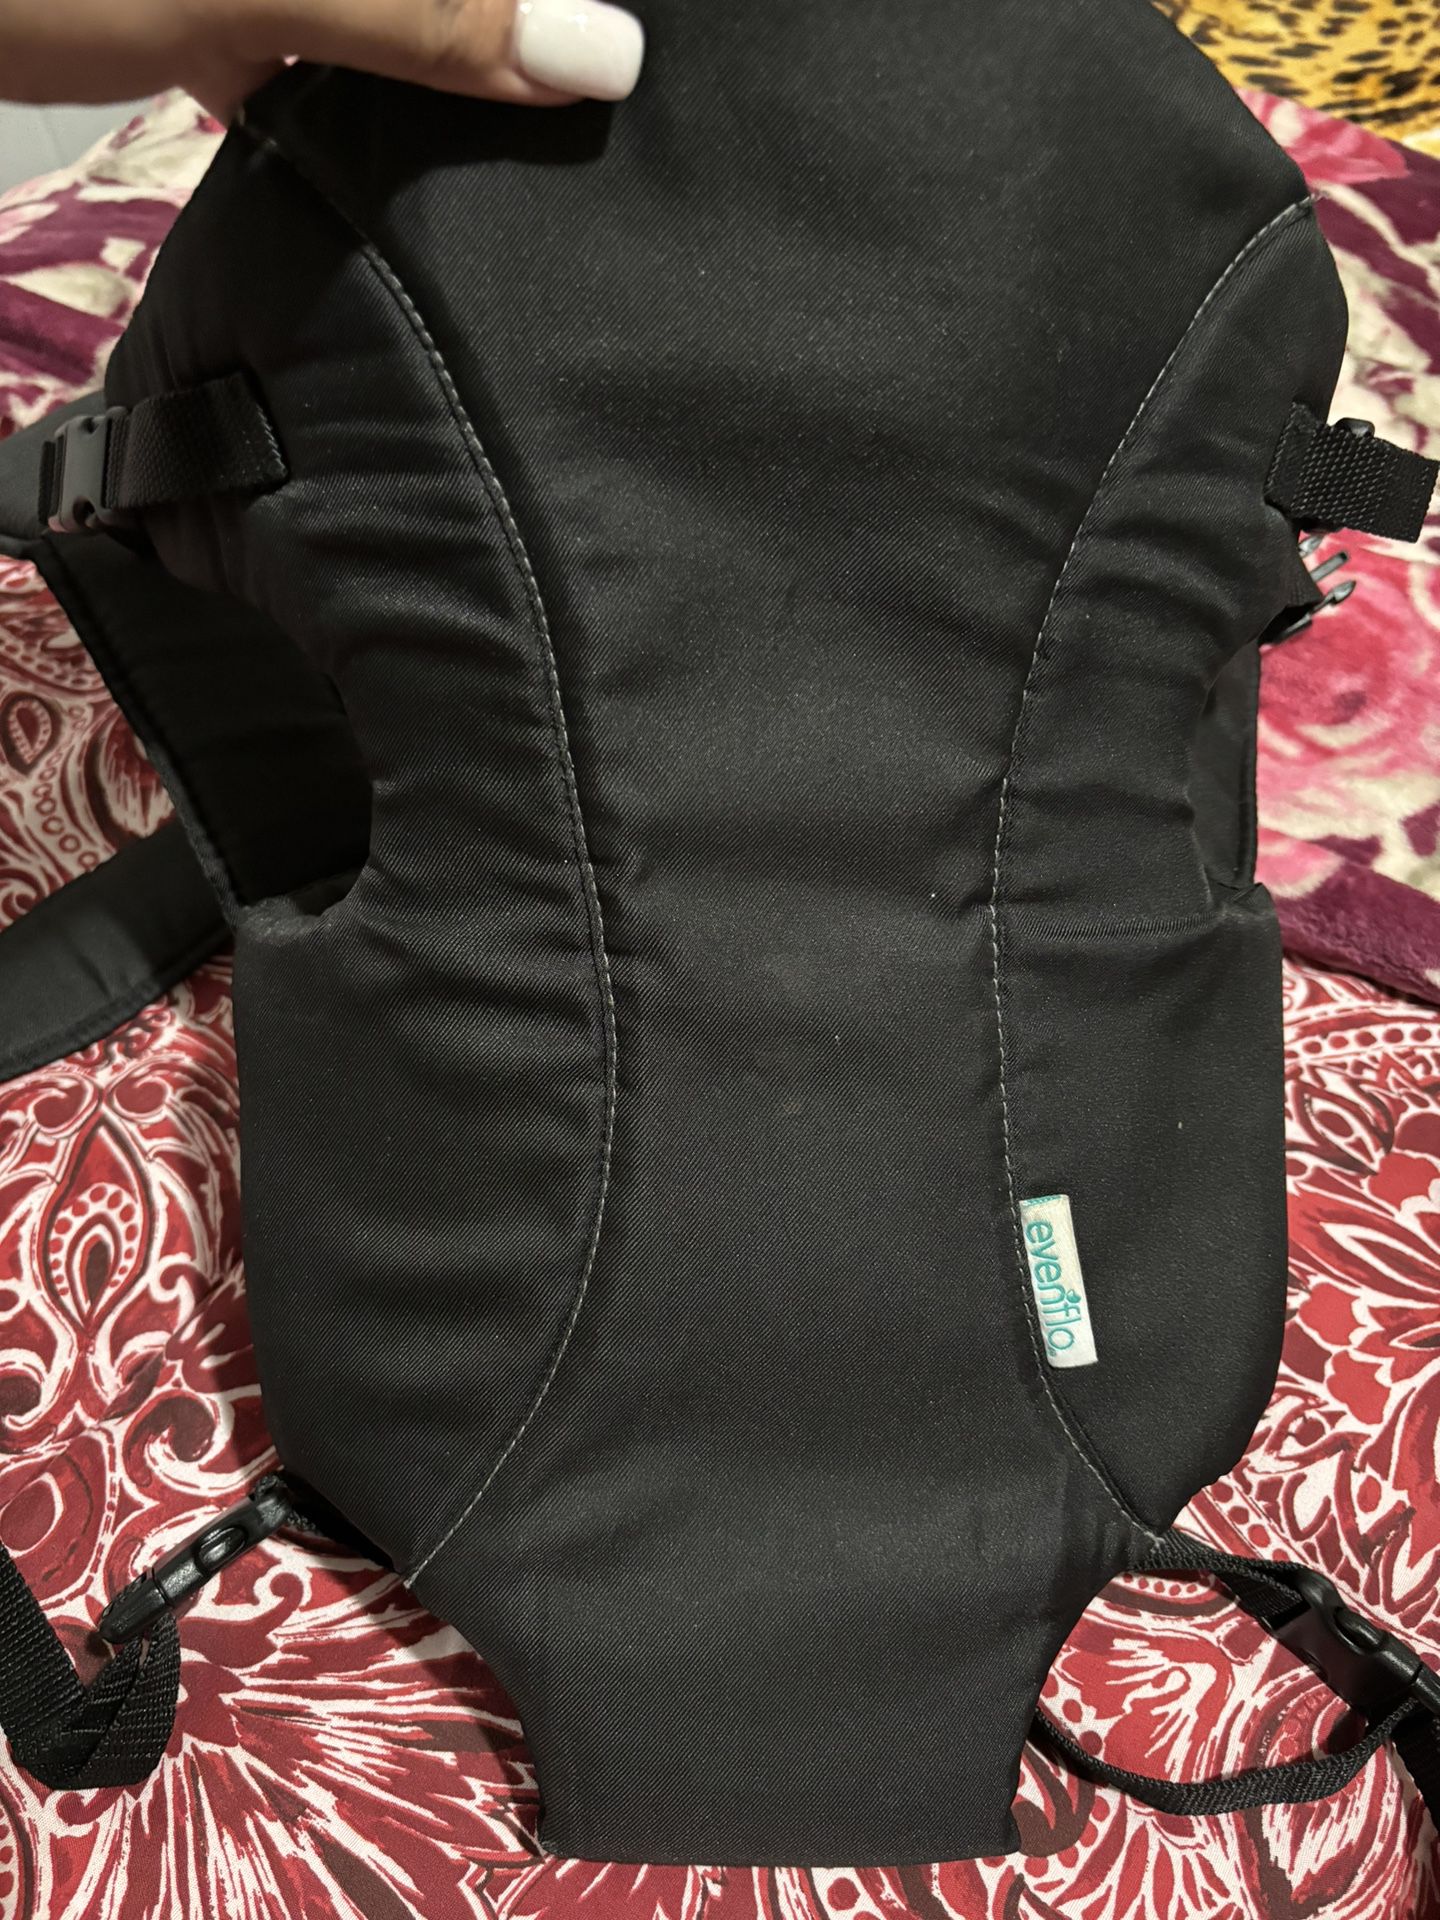 Black Baby Carrier 